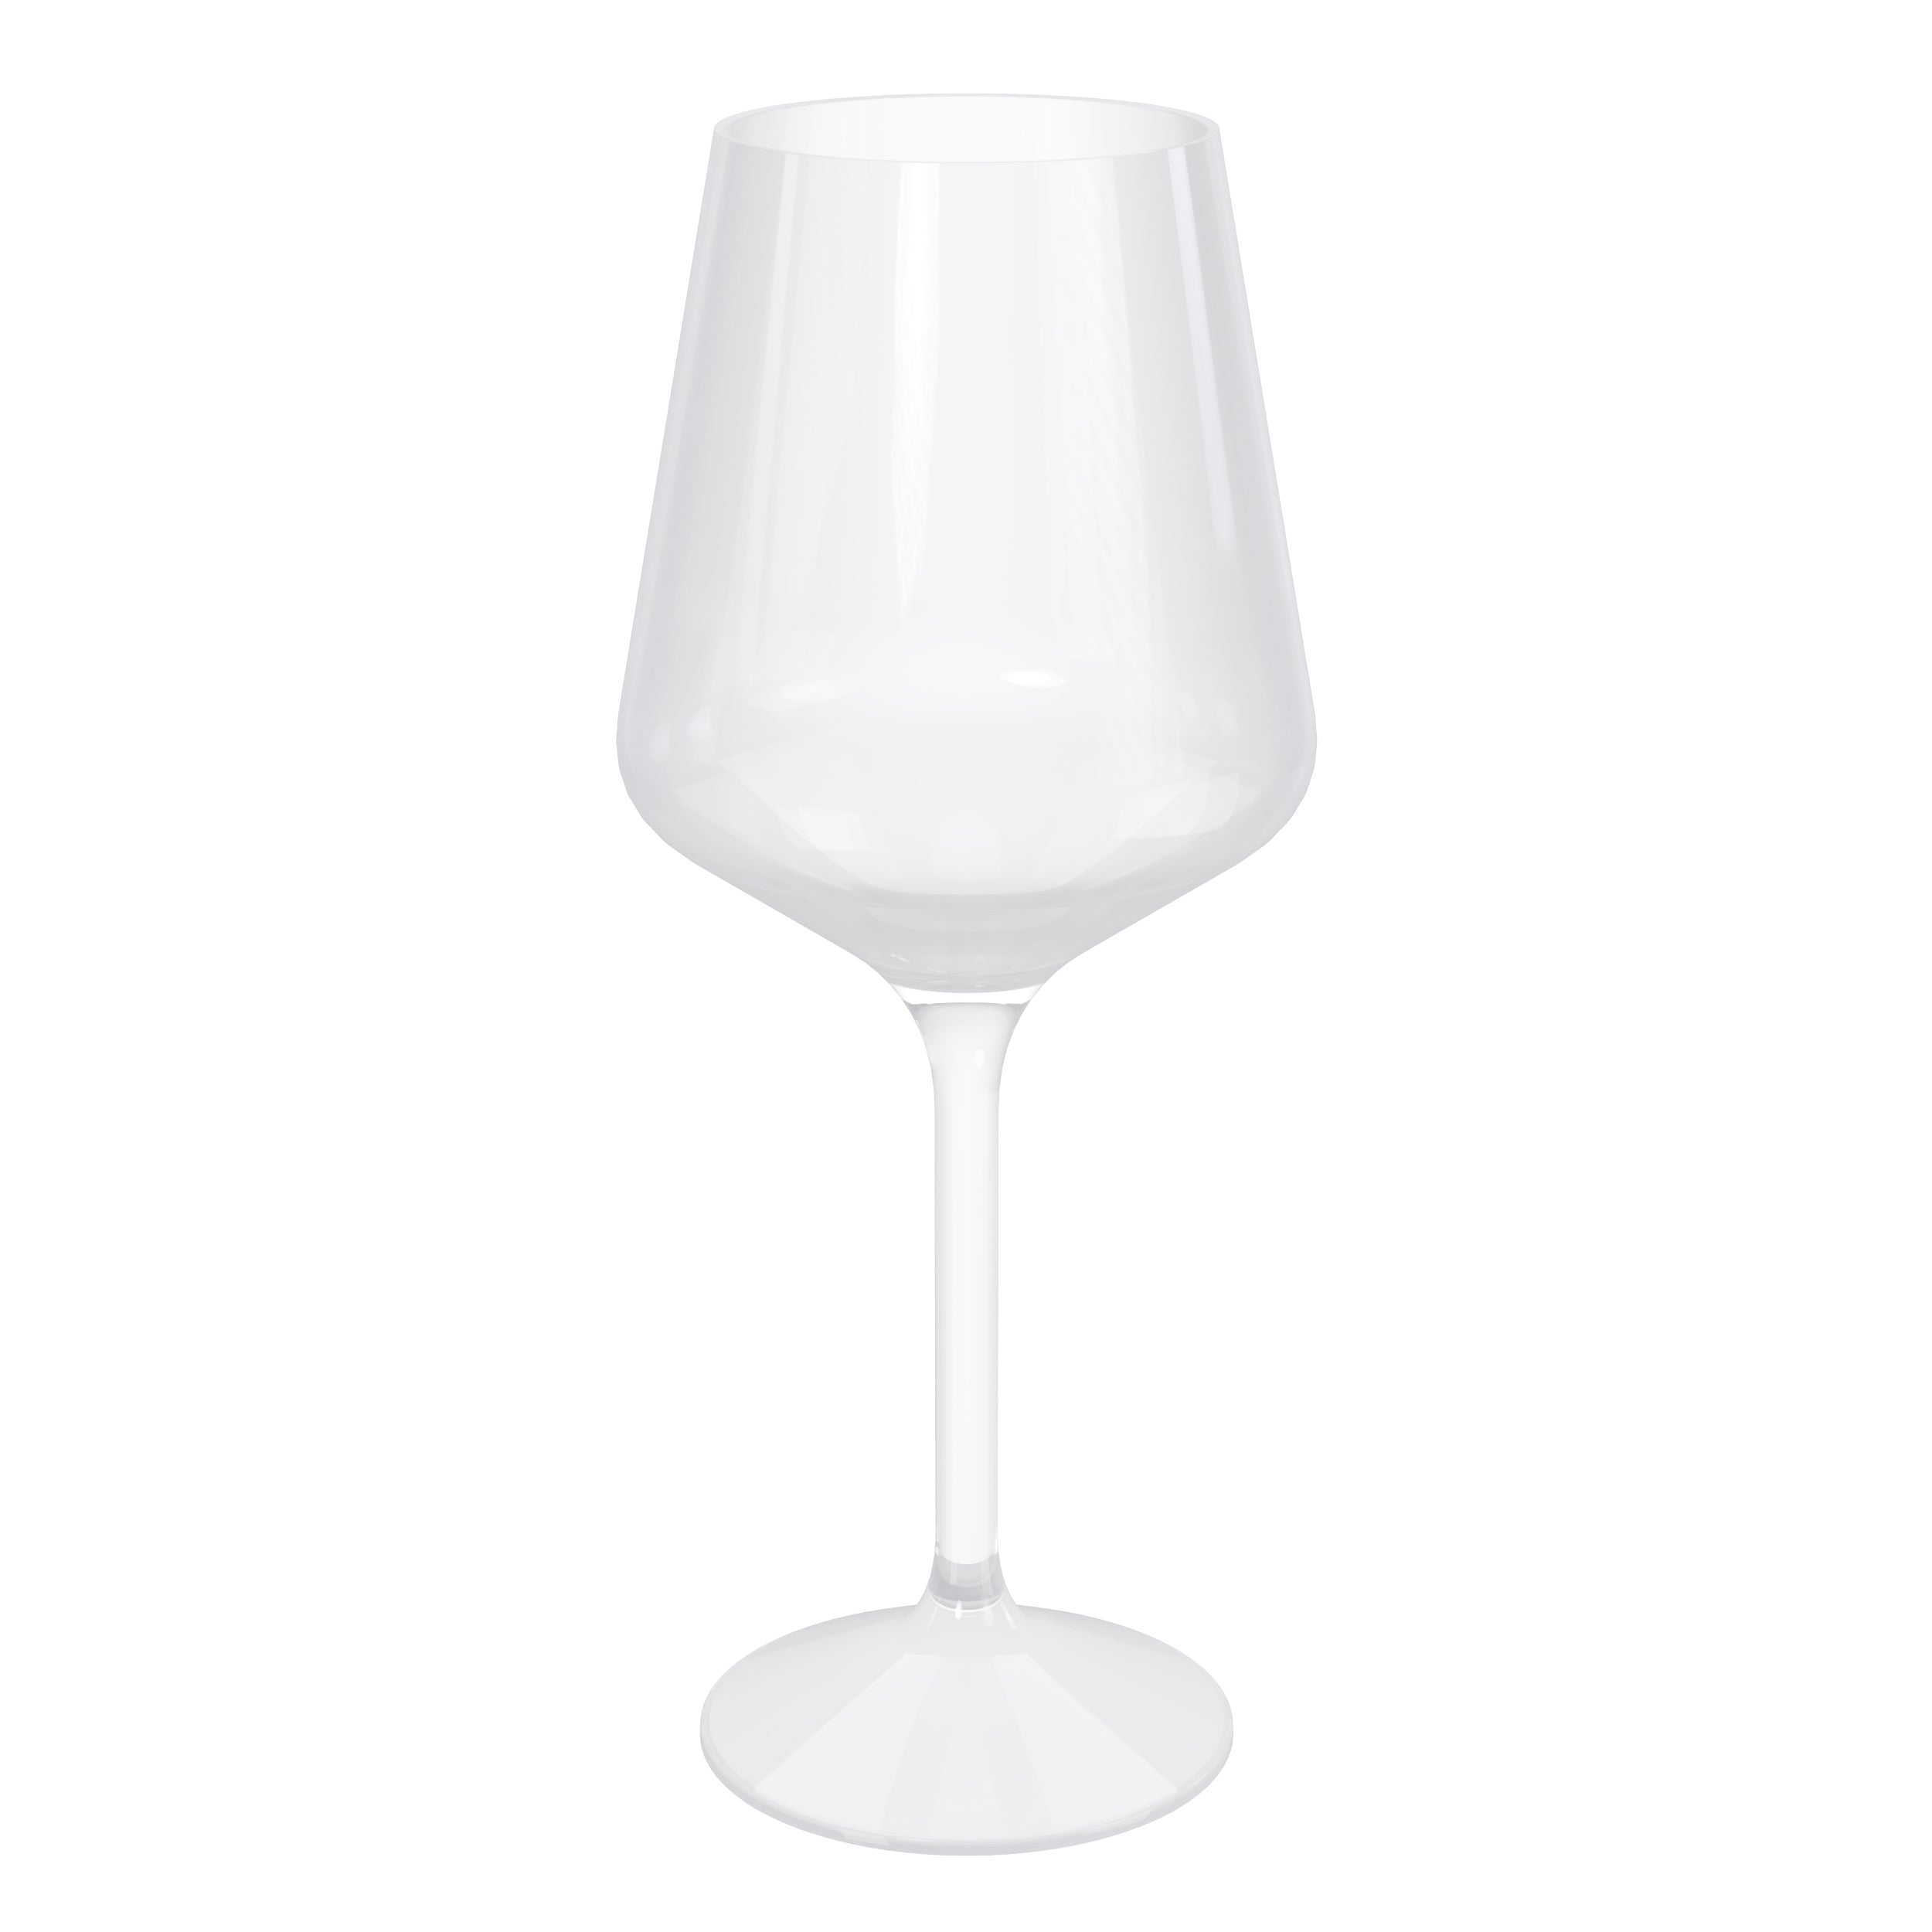 Reusable 16 Oz. Clear Stemmed Wine Cup | 12 Count